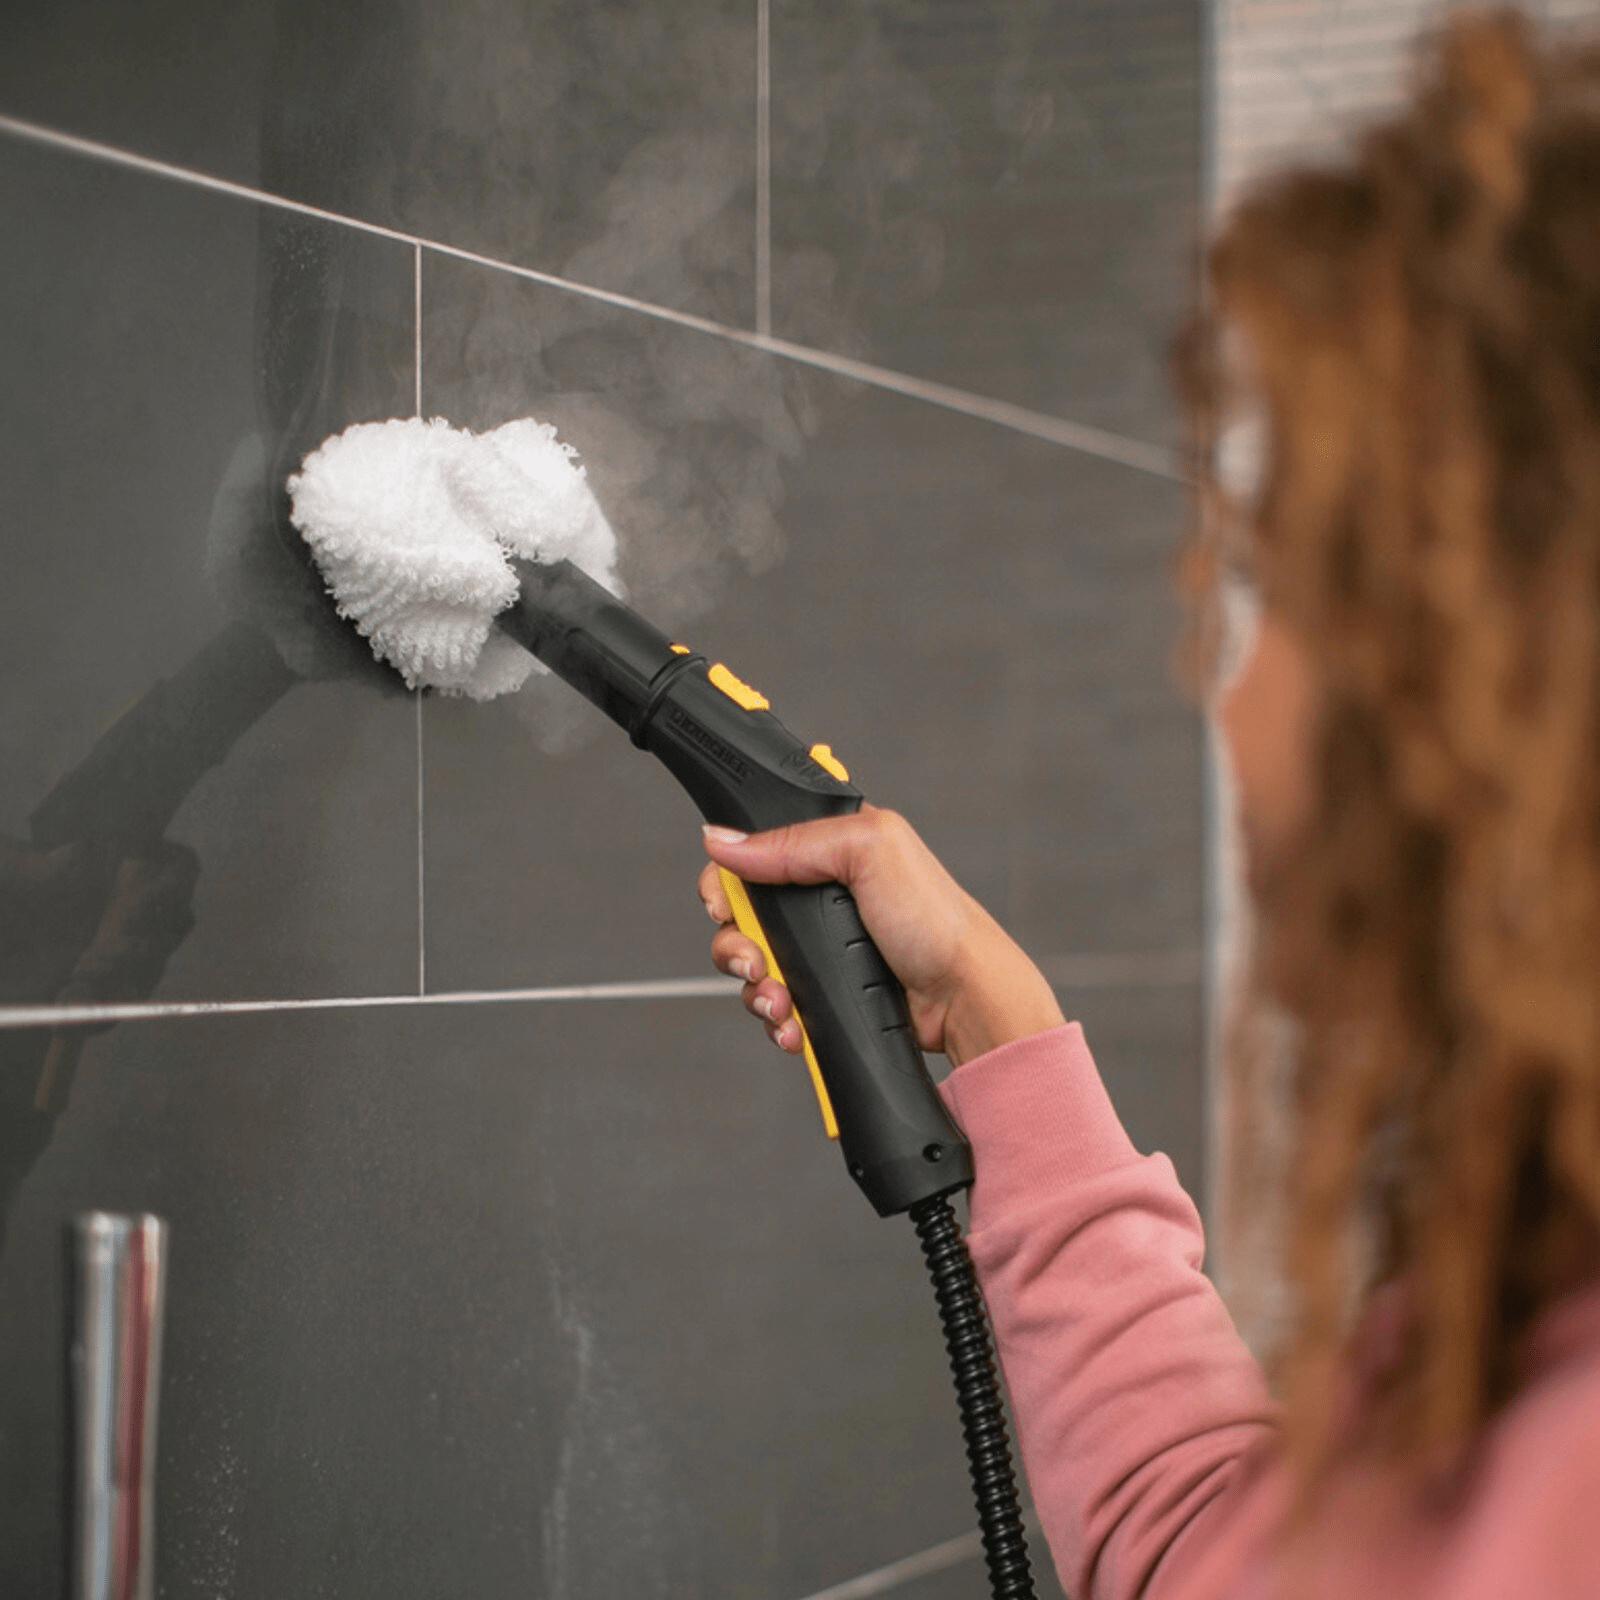 7 Best Tile Floor and Grout Steam Mops - the power of STEAM